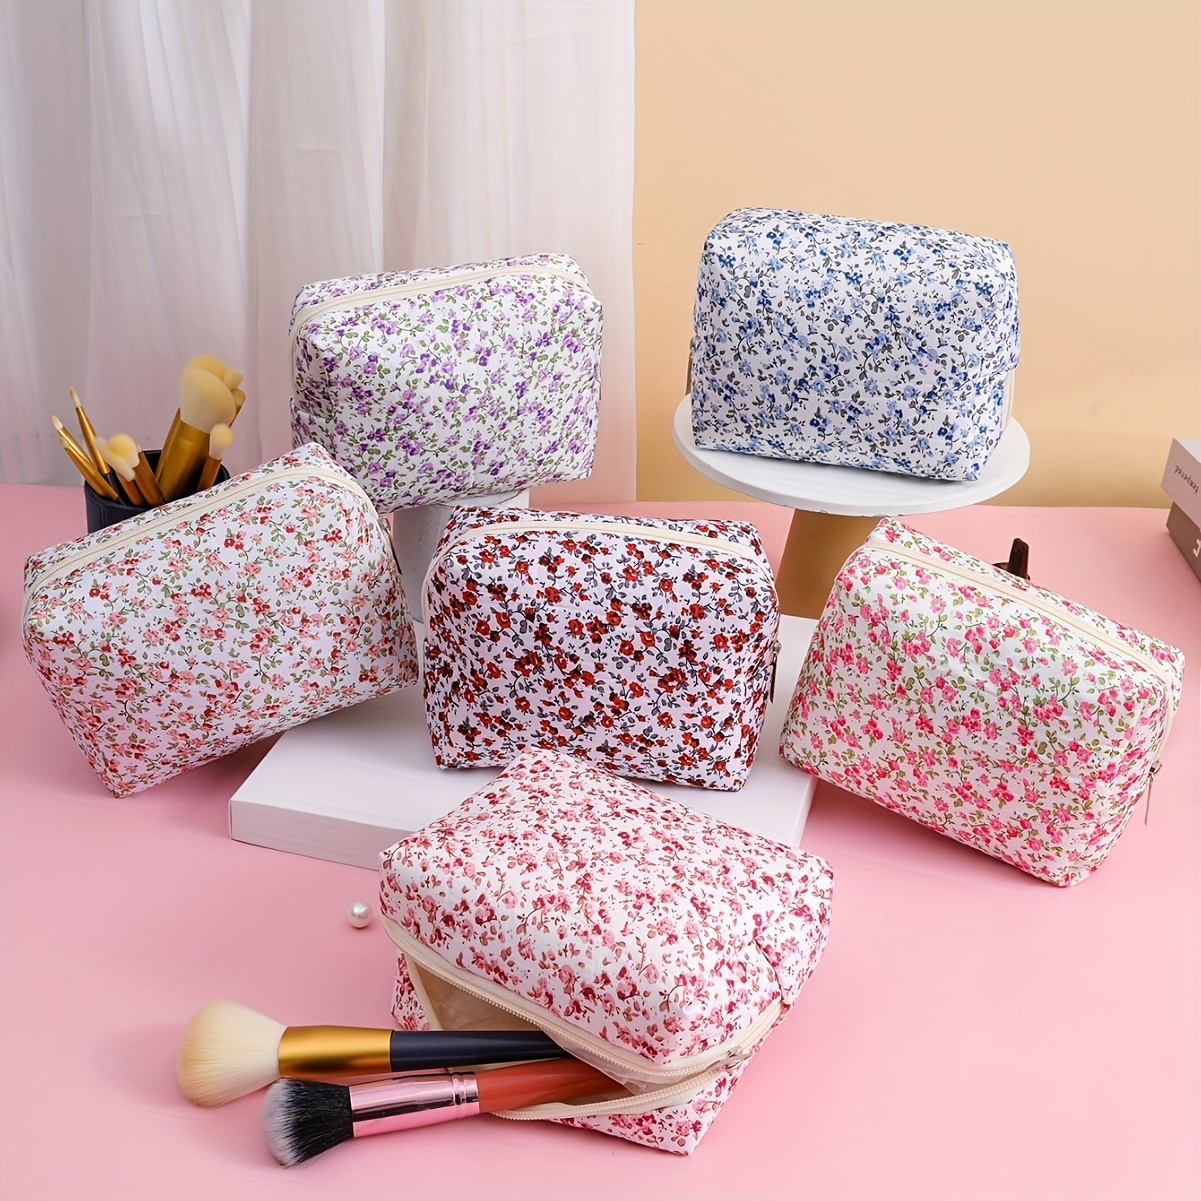 

Floral Print Cosmetic Bag, Fashionable Makeup Pouch With Zipper, Portable Travel Toiletry Organizer For Lipstick And Beauty Products